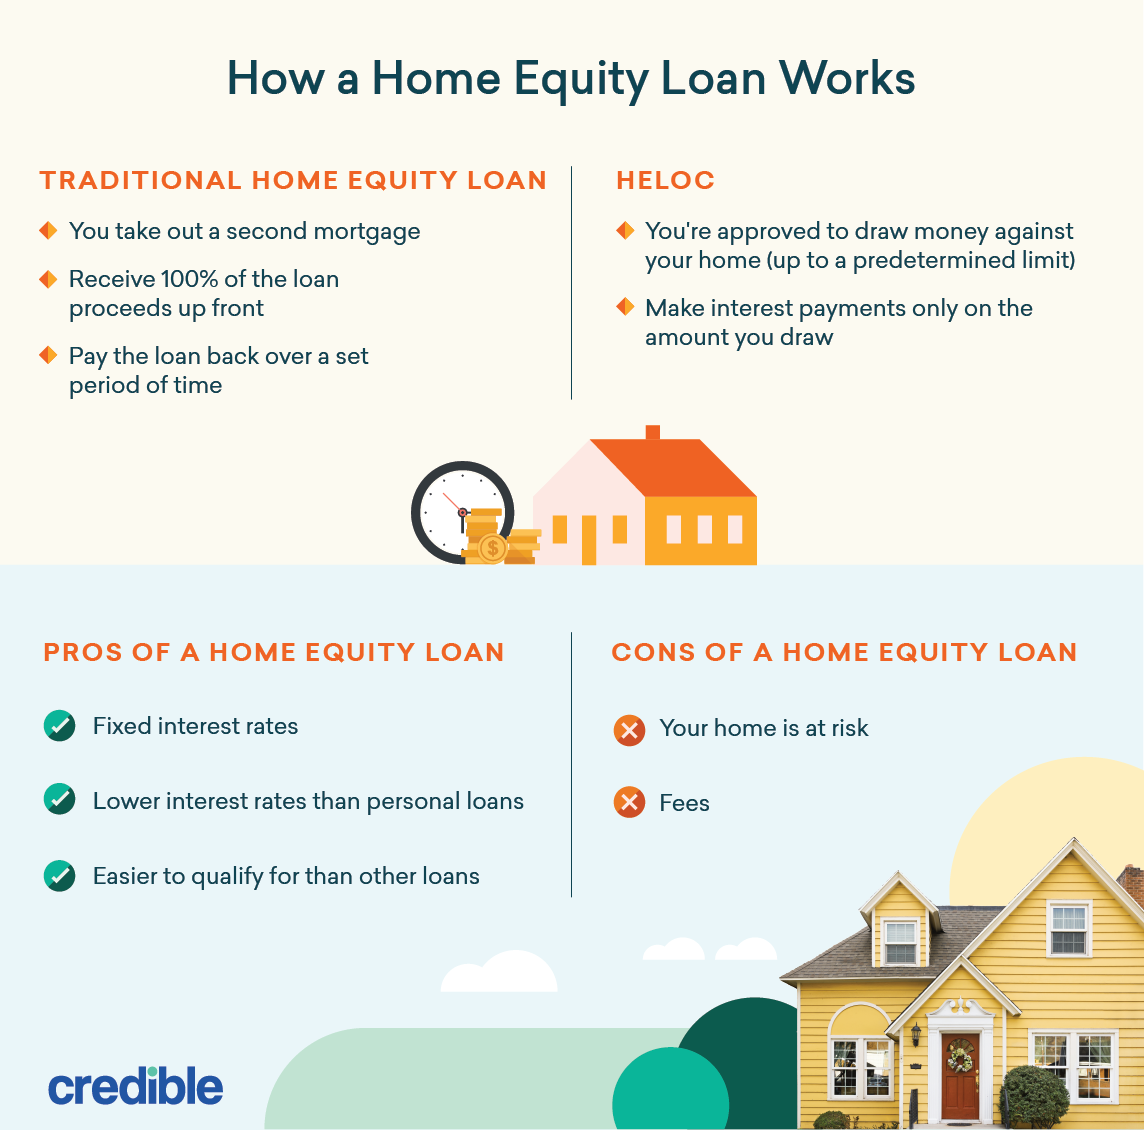 Can I Refinance A Home Equity Line Of Credit